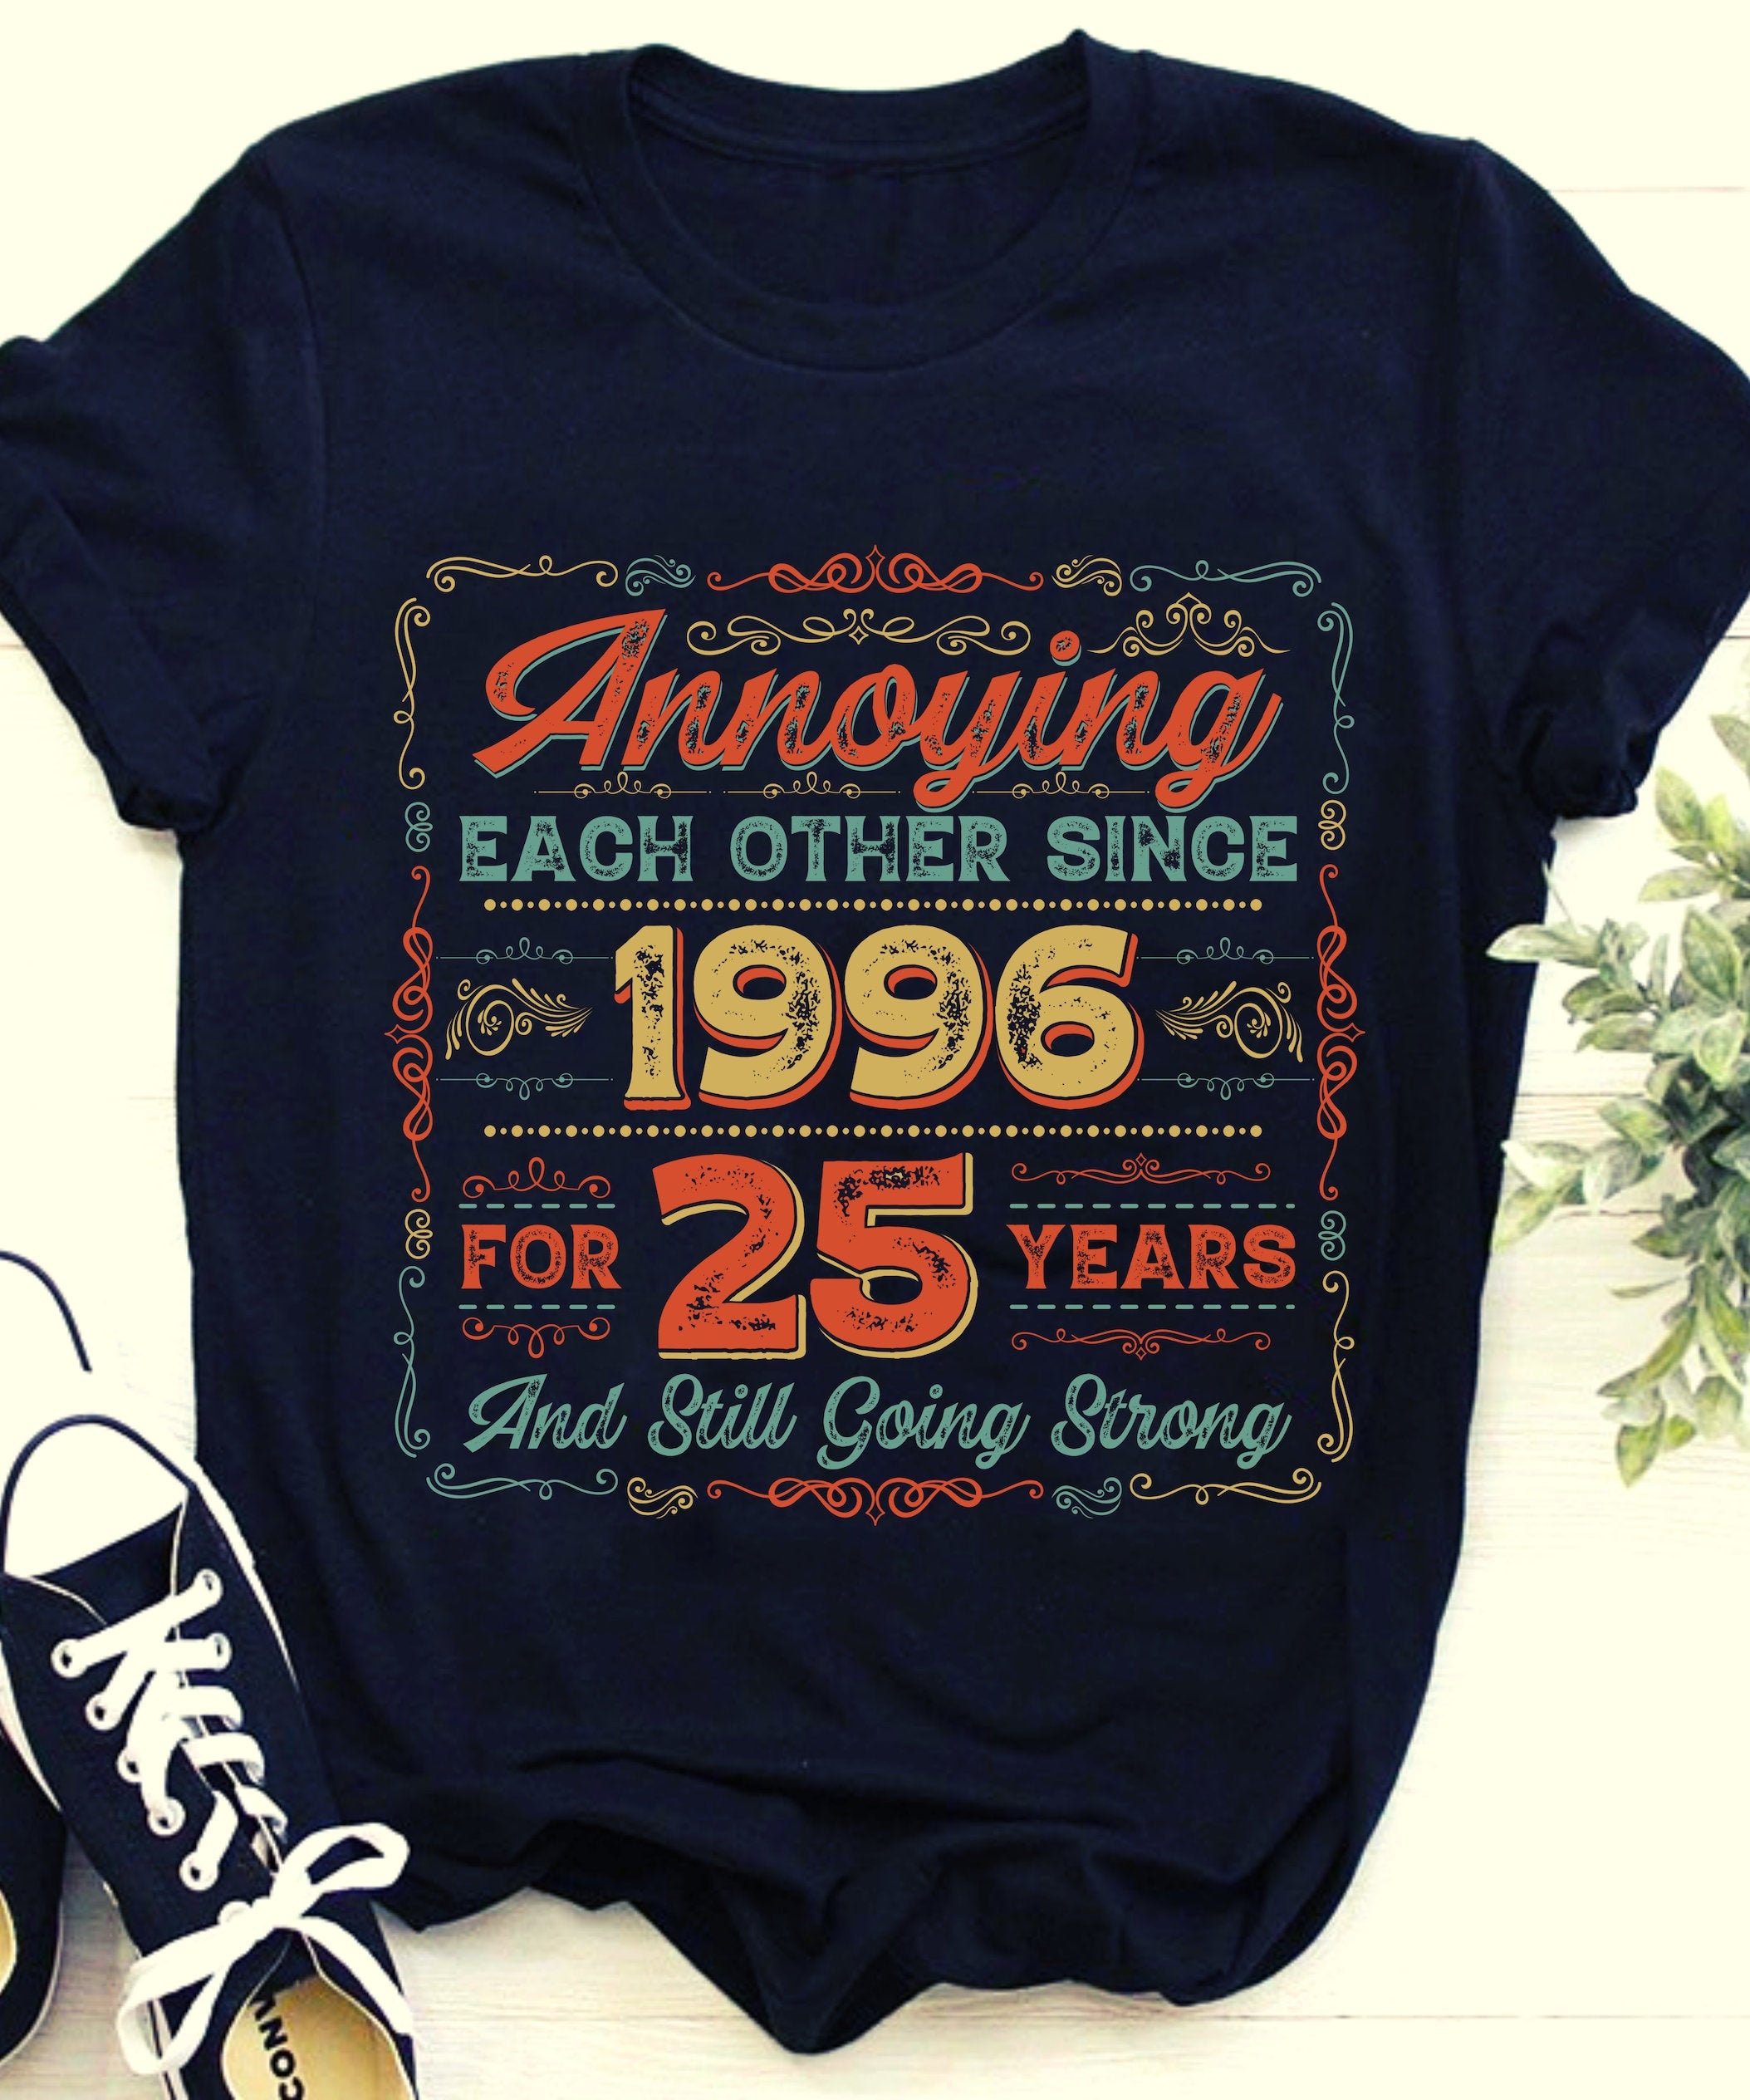 25th Anniversary Shirts Gift Annoying Each Other Since 1996 for 25 Years & Still Going Strong Shirts Customized Couple Matching Shirts